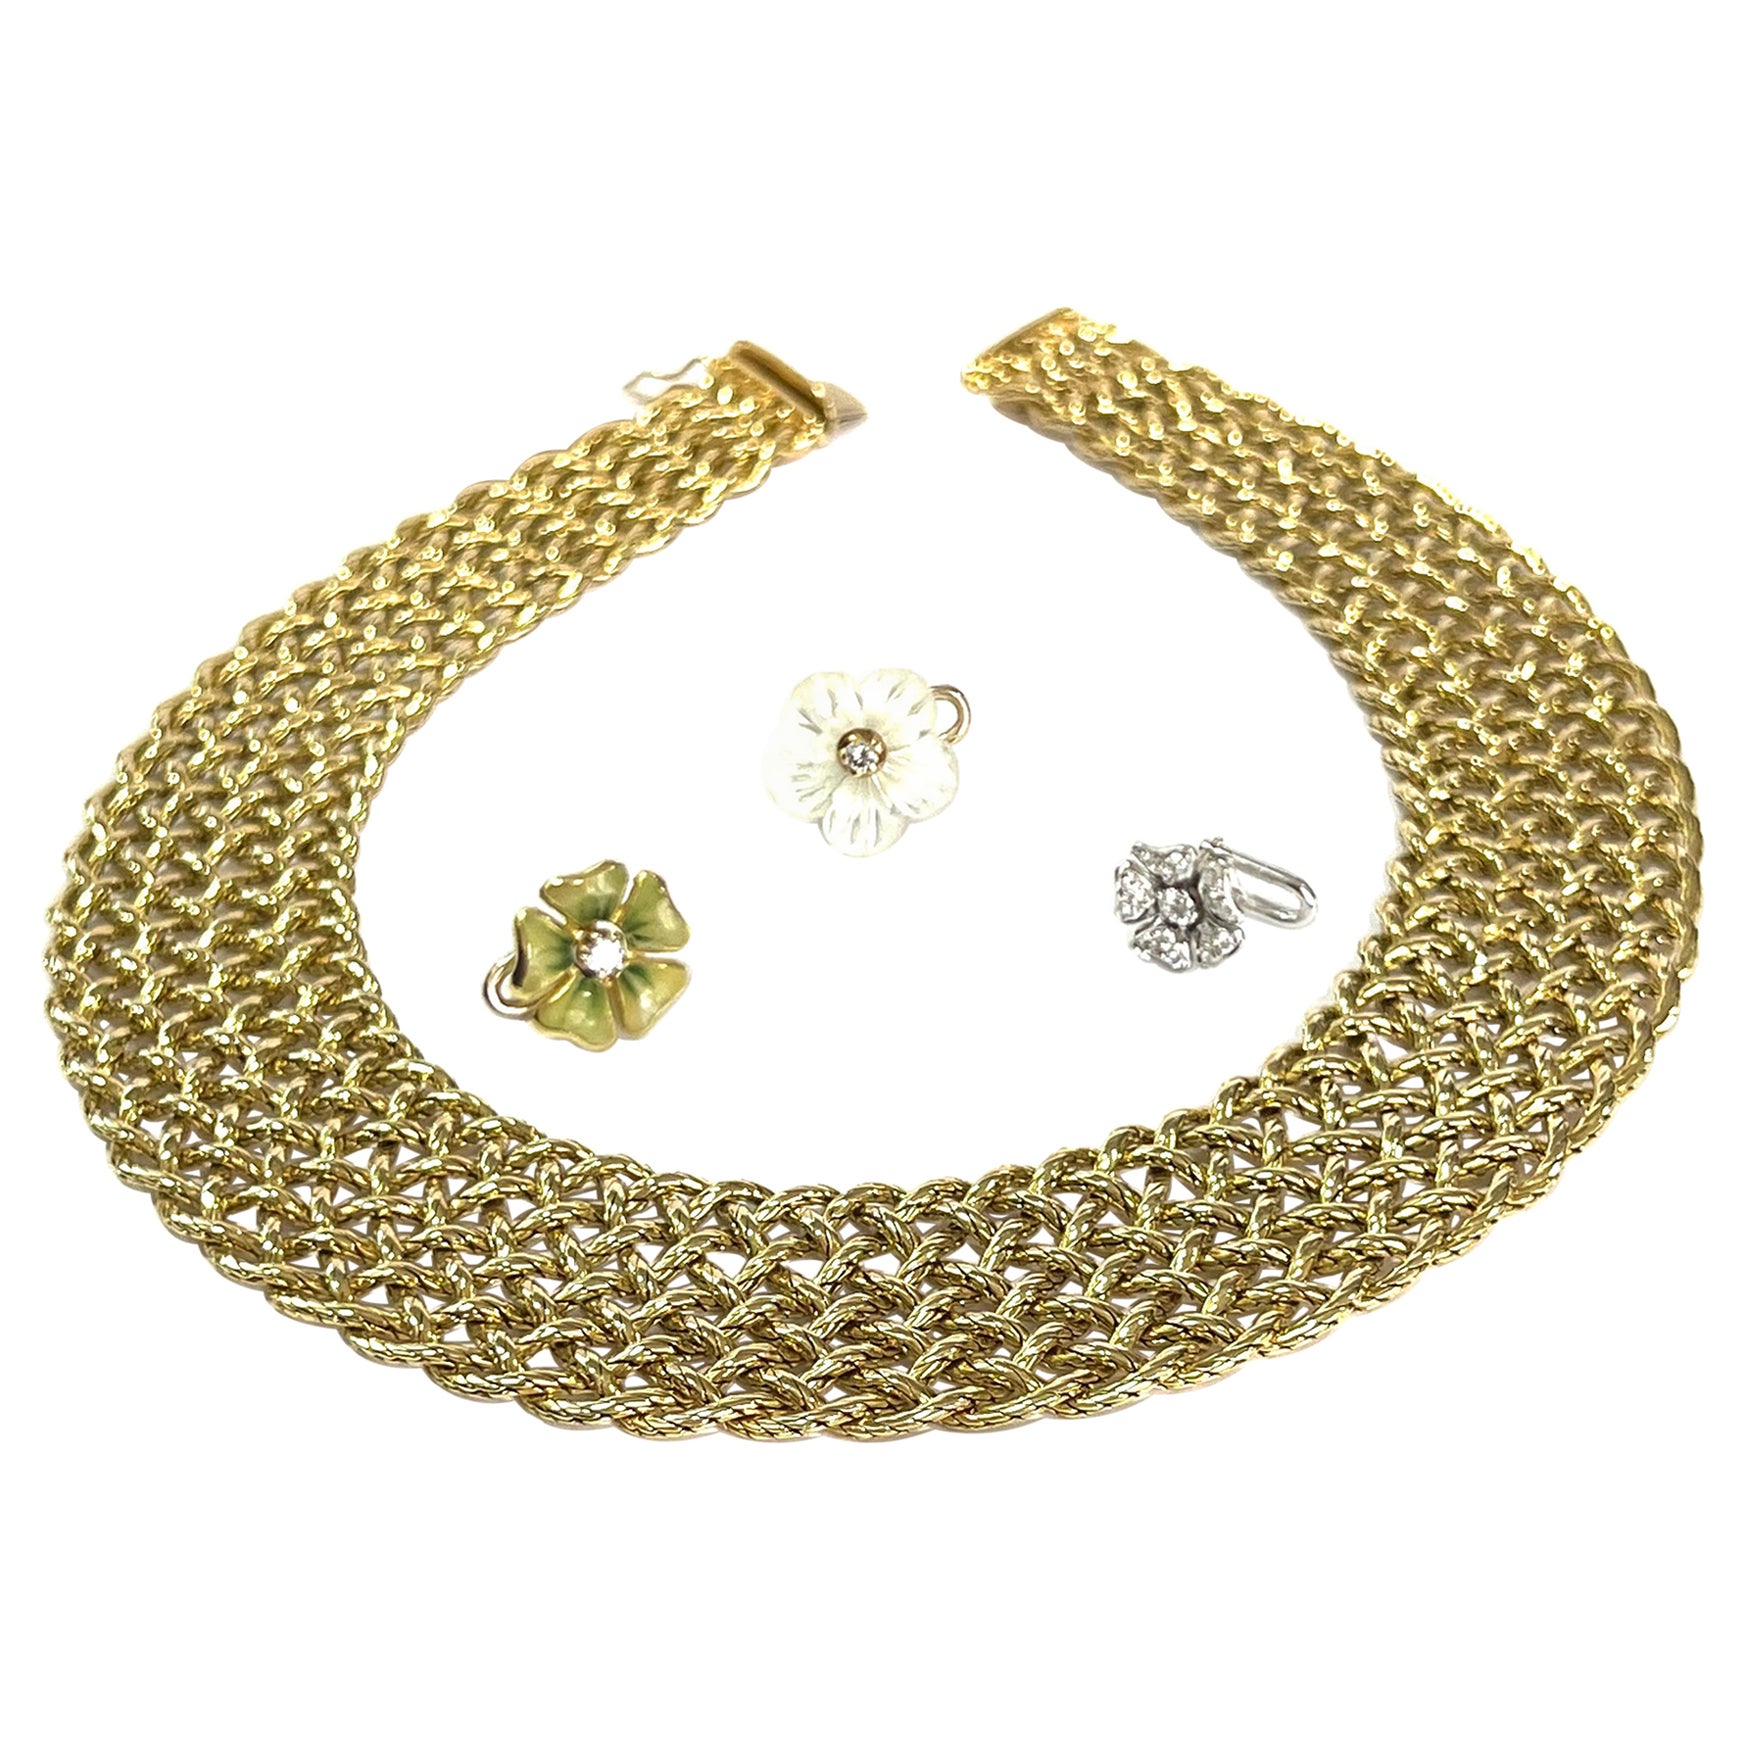 18k net made necklace with detachable flower applications